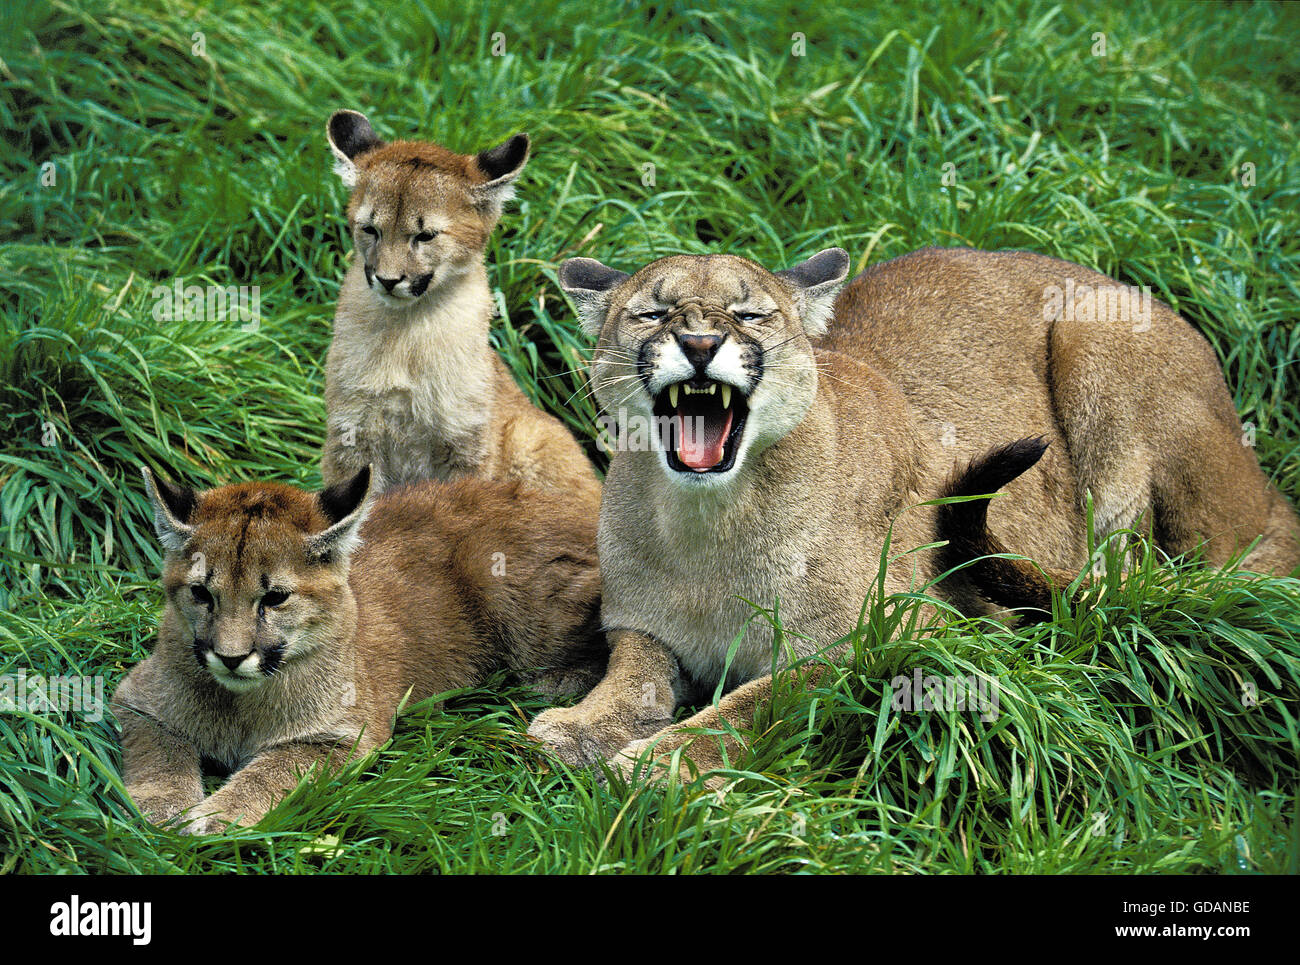 cougar-puma-concolor-female-snarling-protecting-cub-GDANBE.jpg